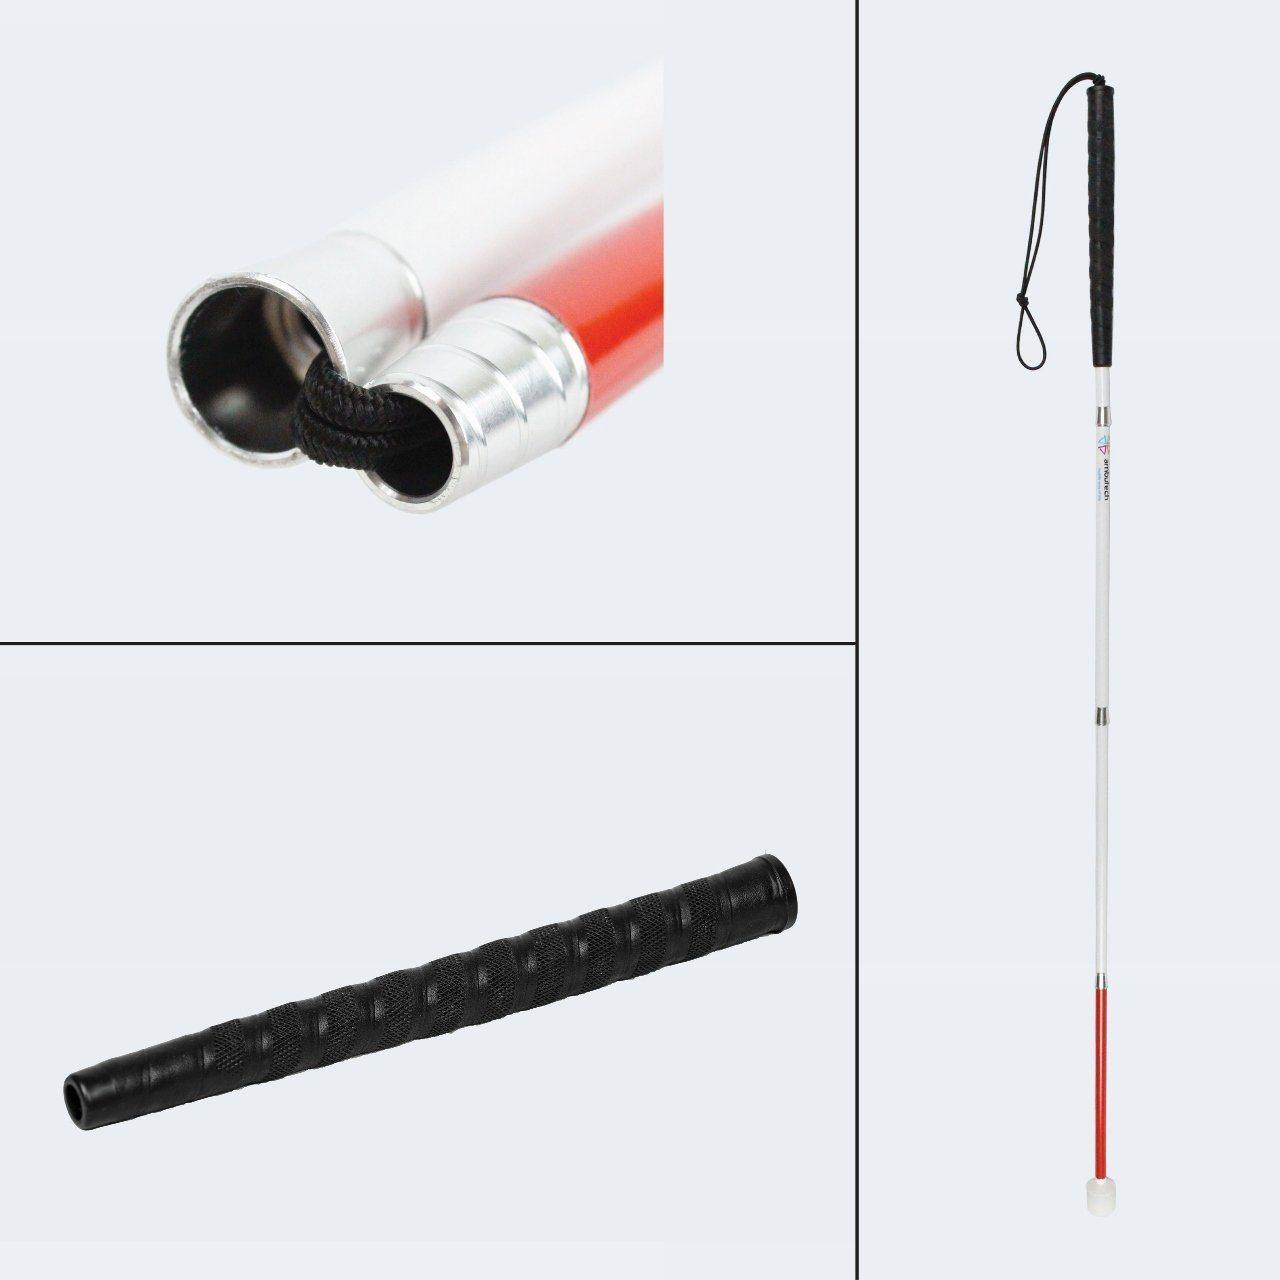 Aluminum Mobility Cane - Standard Handle - The Low Vision Store